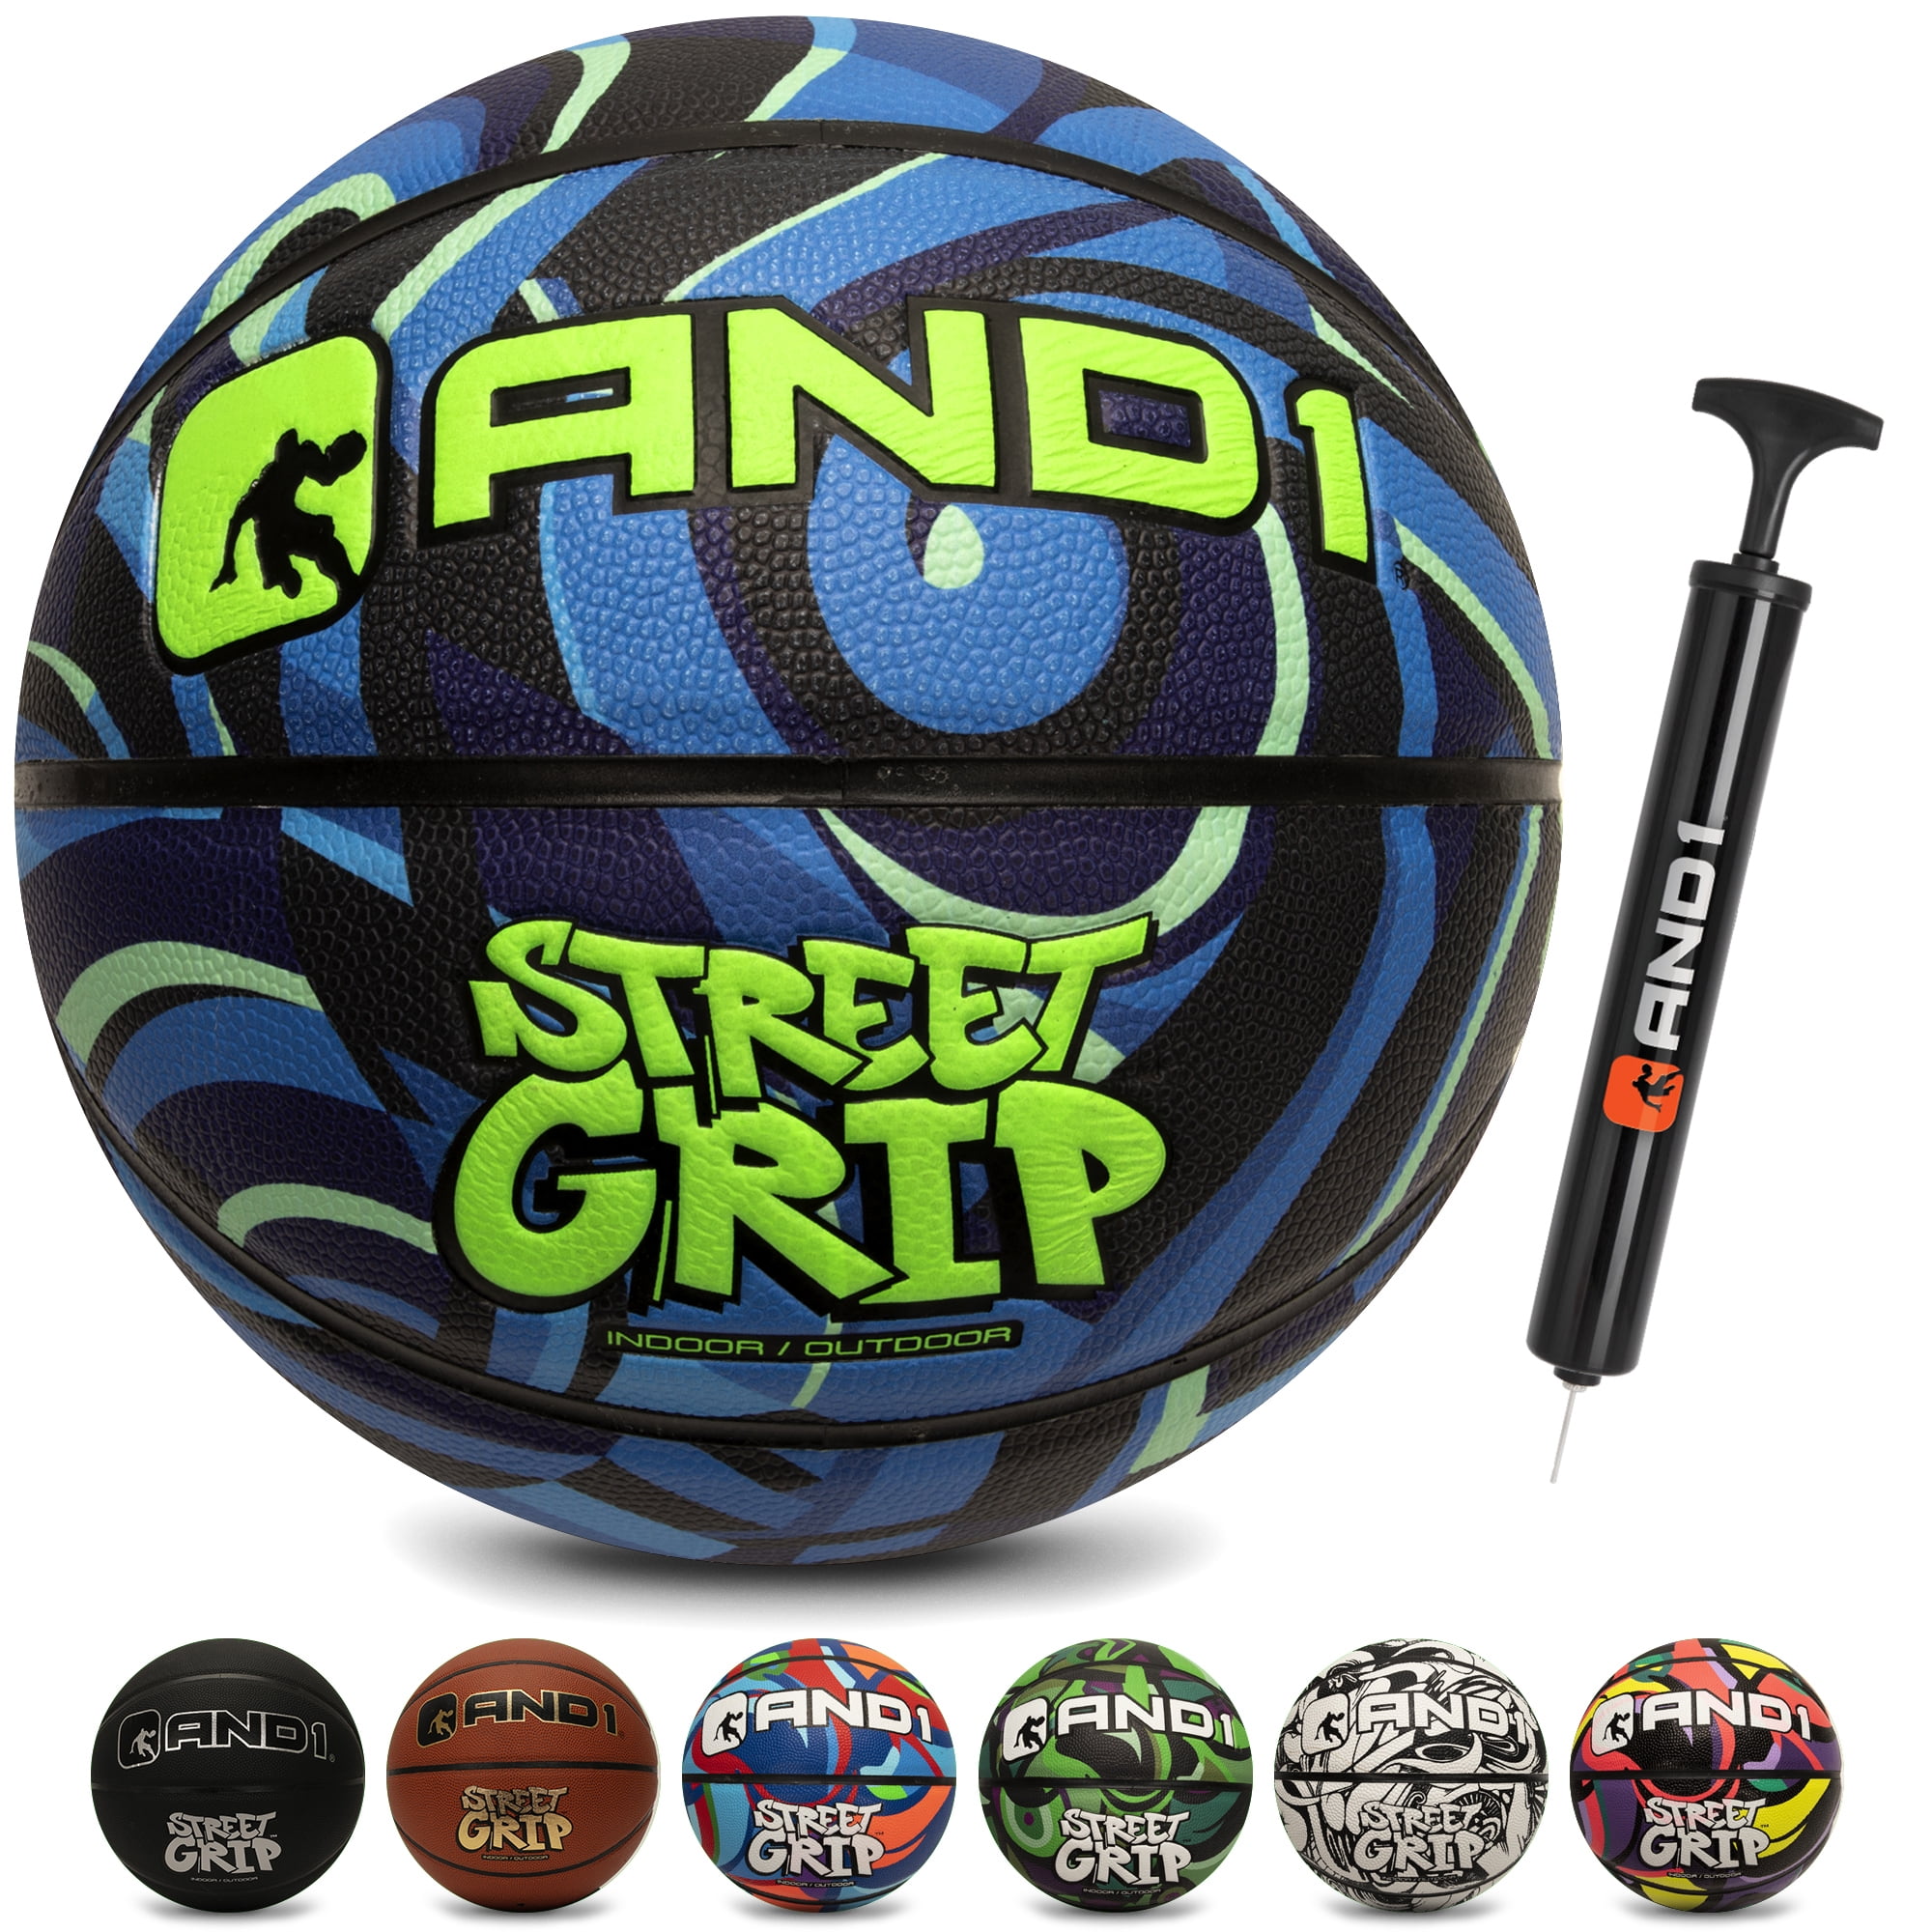 And1 Enigma Street Basketball Official Size 7 Wide Channel Grip Ball New 29.5 